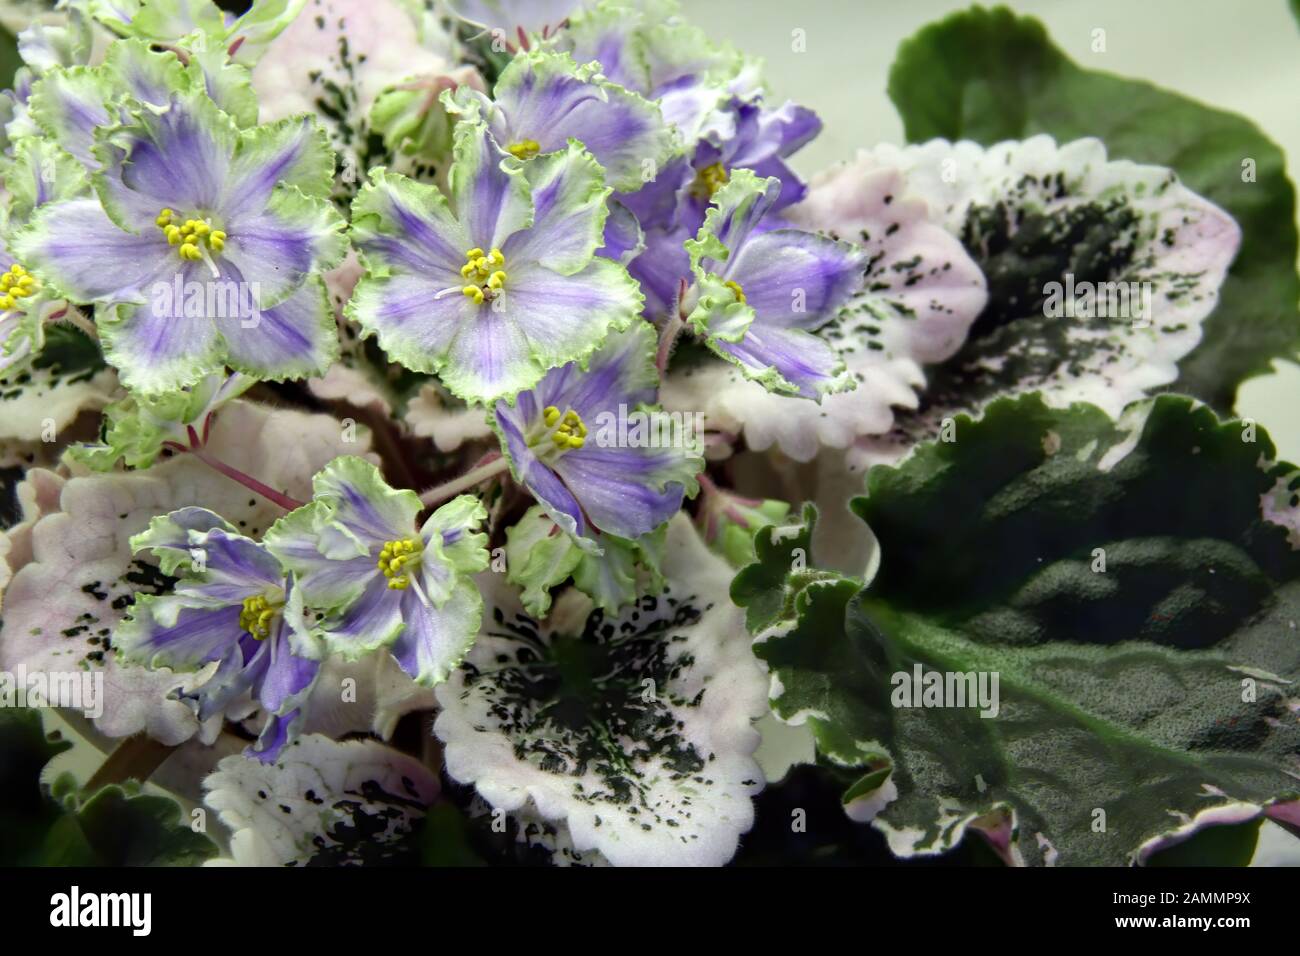 Floral background of beautiful pale blue flowers of African violet or Saintpaulia close-up Stock Photo